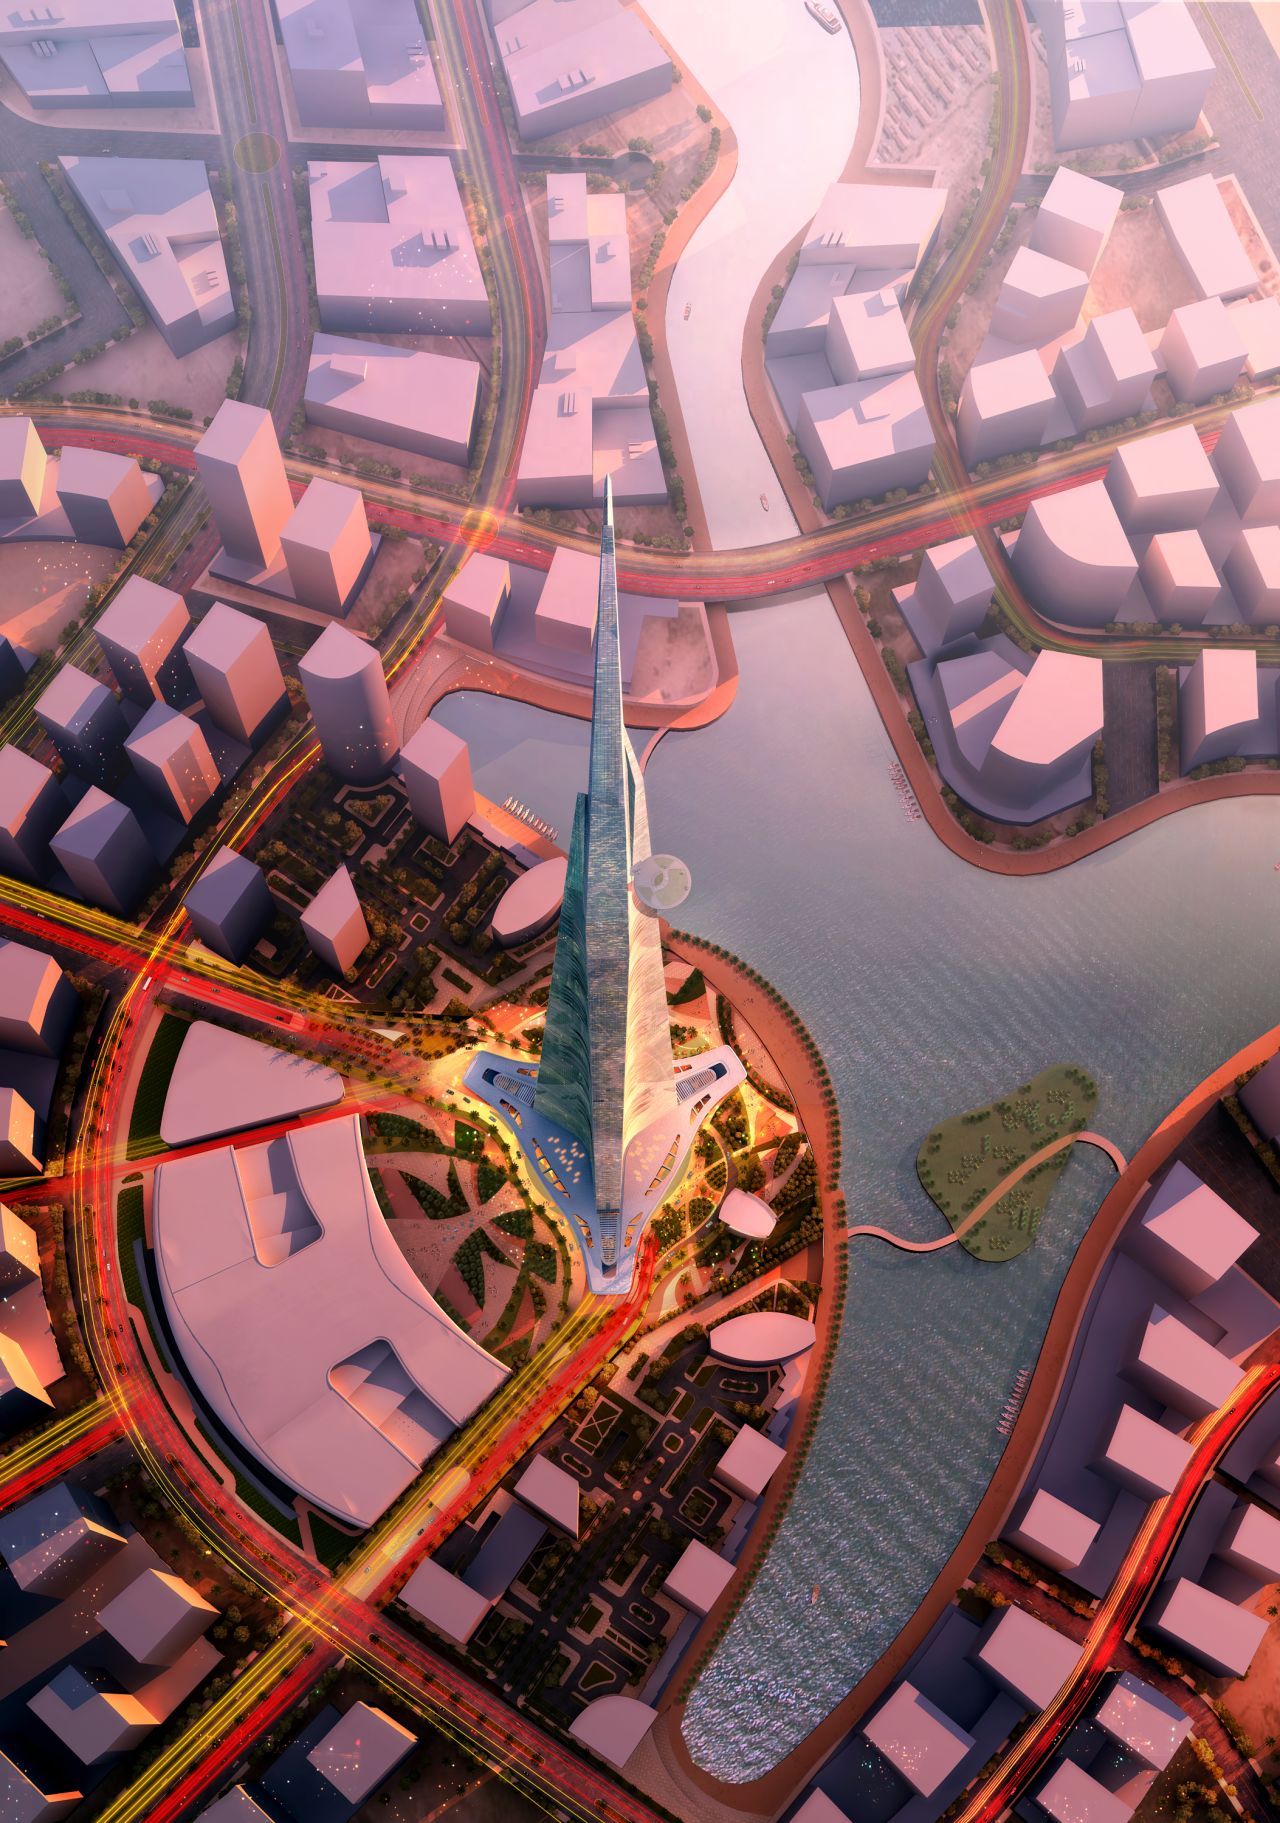 Also competing for the title of the world's tallest building is Jeddah Tower in Saudi Arabia. Designed by Adrian Smith + Gordon Gill Architecture, the tower aims to break the 1 km (3,280 feet) threshold upon its expected completion in 2019. Such innovation doesn't come cheap - the building is expected to cost <a href="http://edition.cnn.com/2015/11/30/world/meast/saudi-arabia-worlds-tallest-building-jeddah-tower/">$1.23 billion</a>.